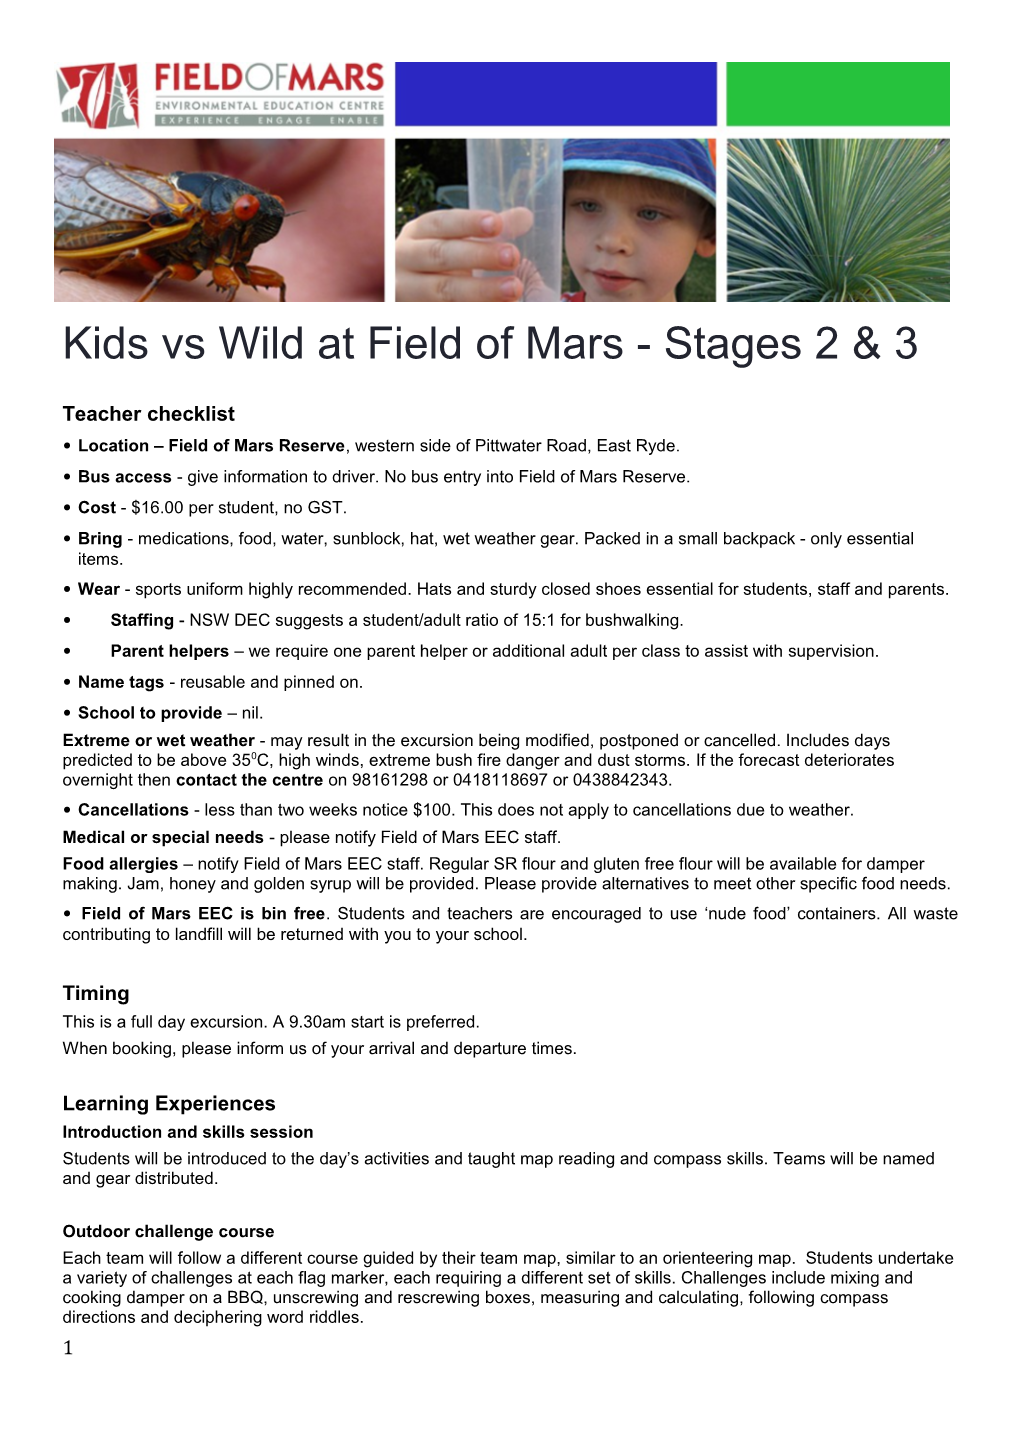 Kids Vs Wild at Field of Mars- Stages 2 & 3